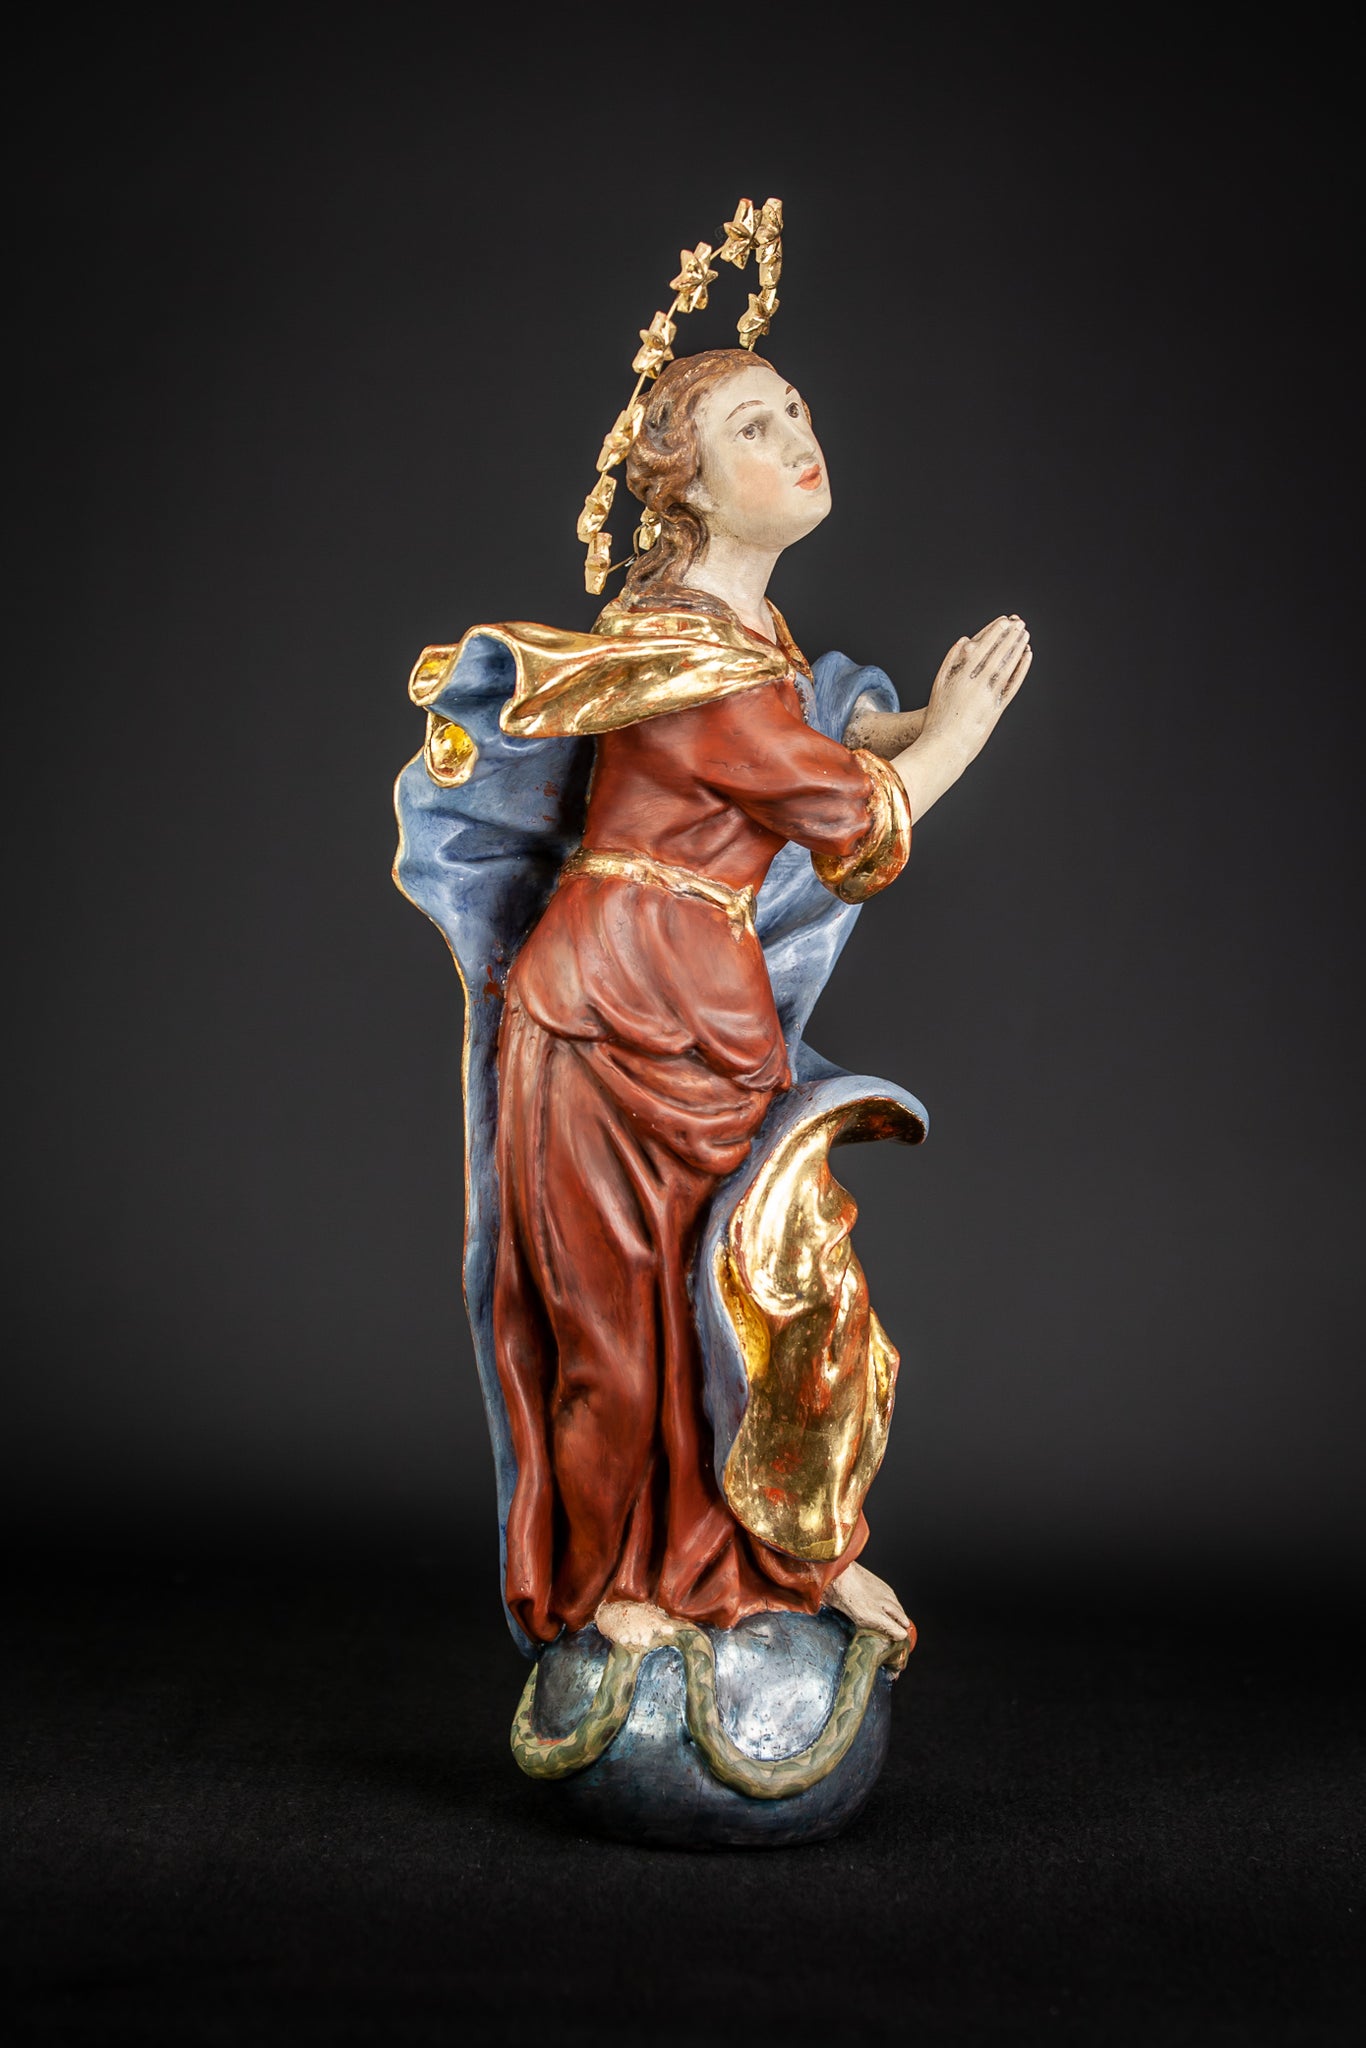 Baroque 17th Cent Wooden Virgin Mary Sculpture | 22.4”